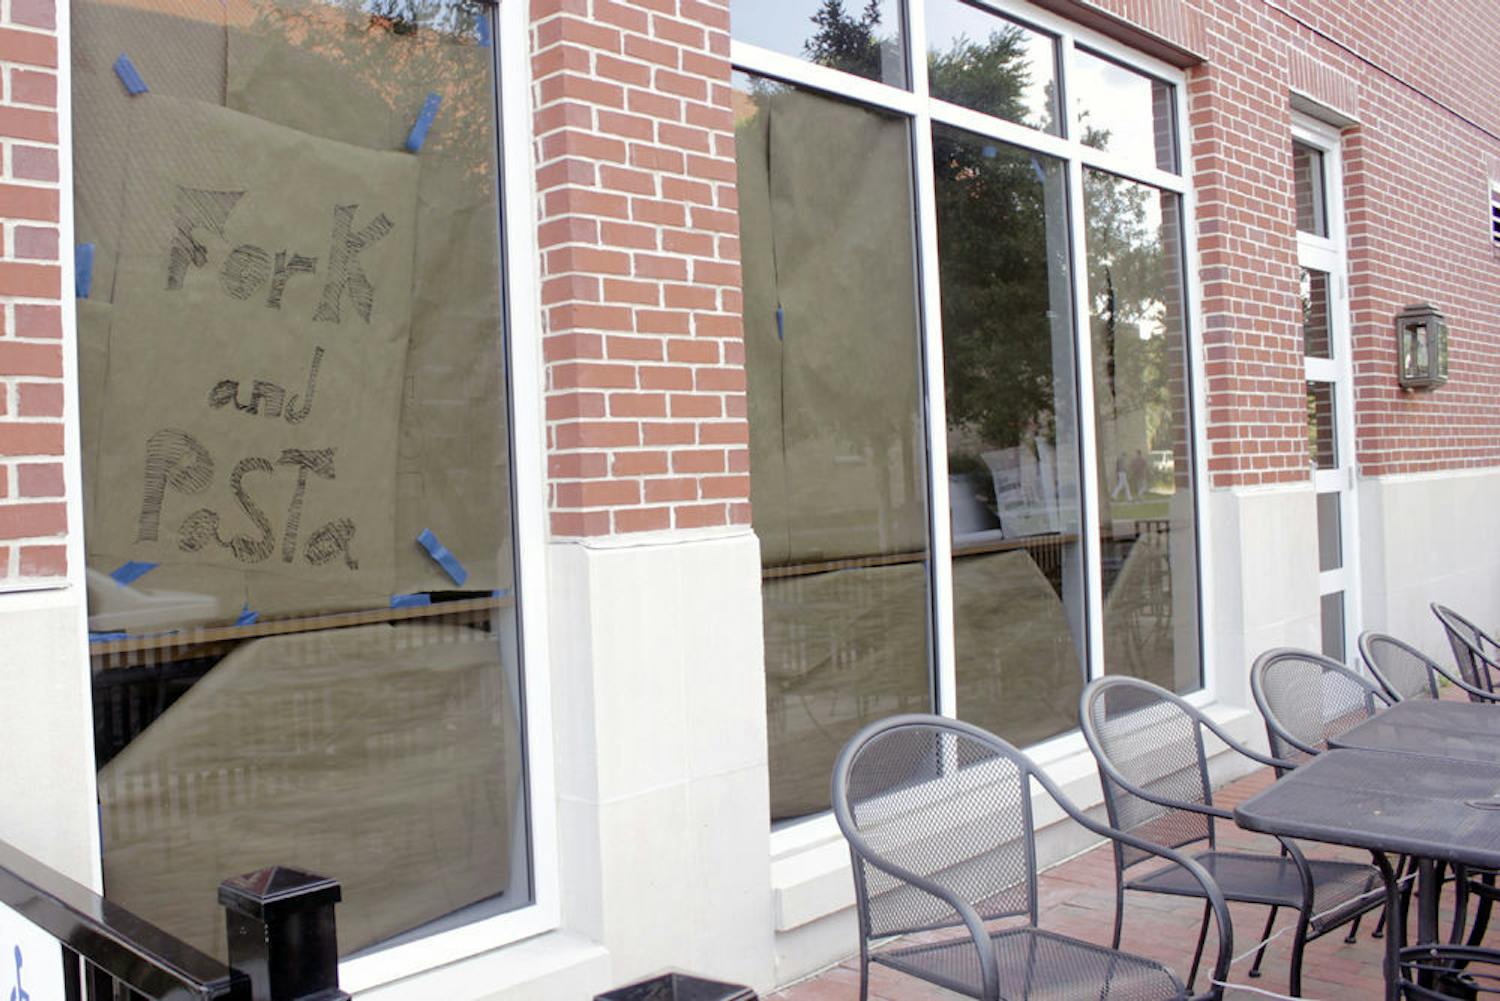 A paper sign hangs in the window of Fork and Pasta at 1802 W University Ave. on Wednesday.